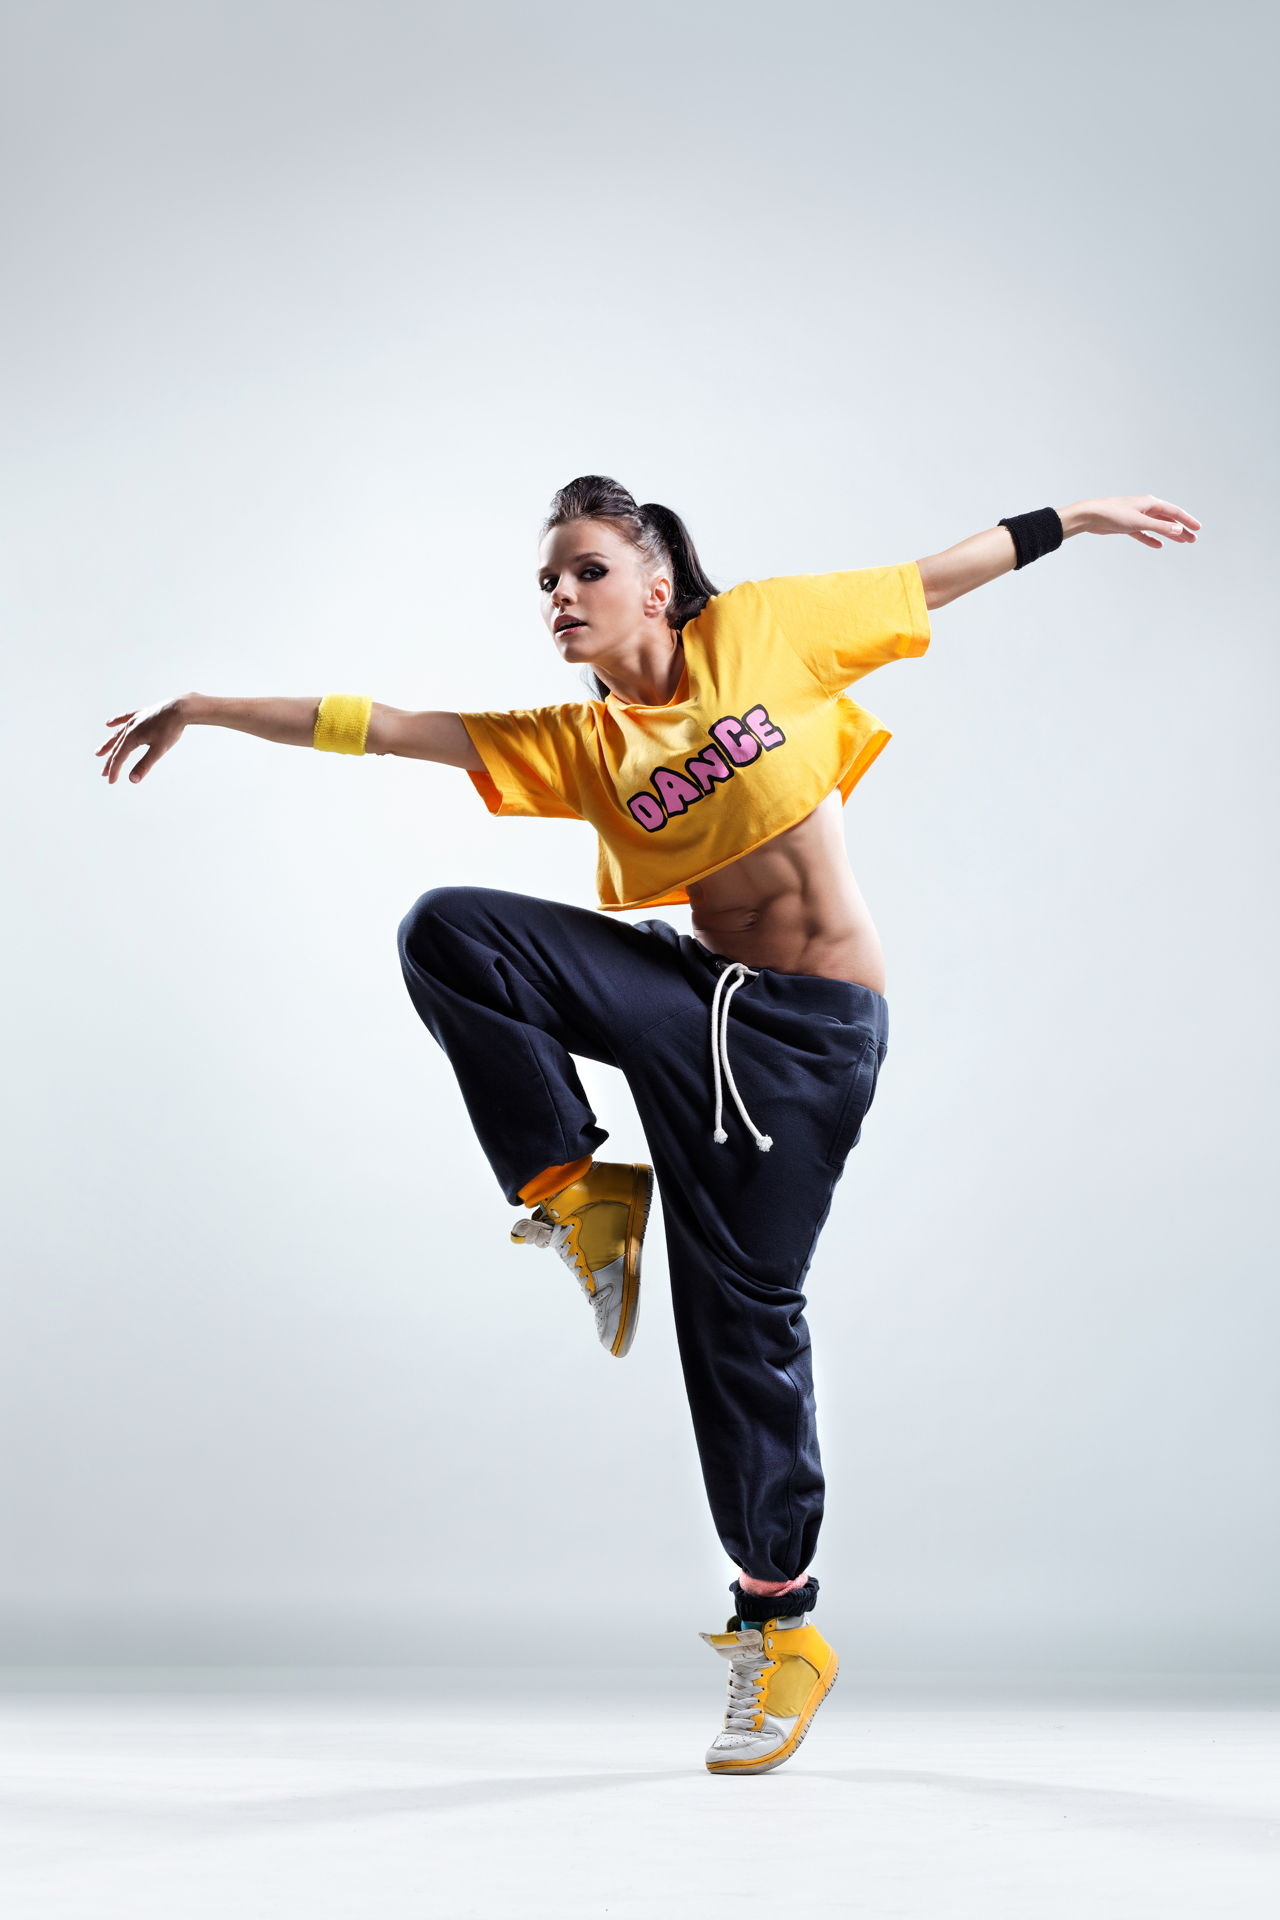 Popping Dance: Hip-Hop dancers, The dance that is rooted through the rhythms of live funk music. 1280x1920 HD Wallpaper.